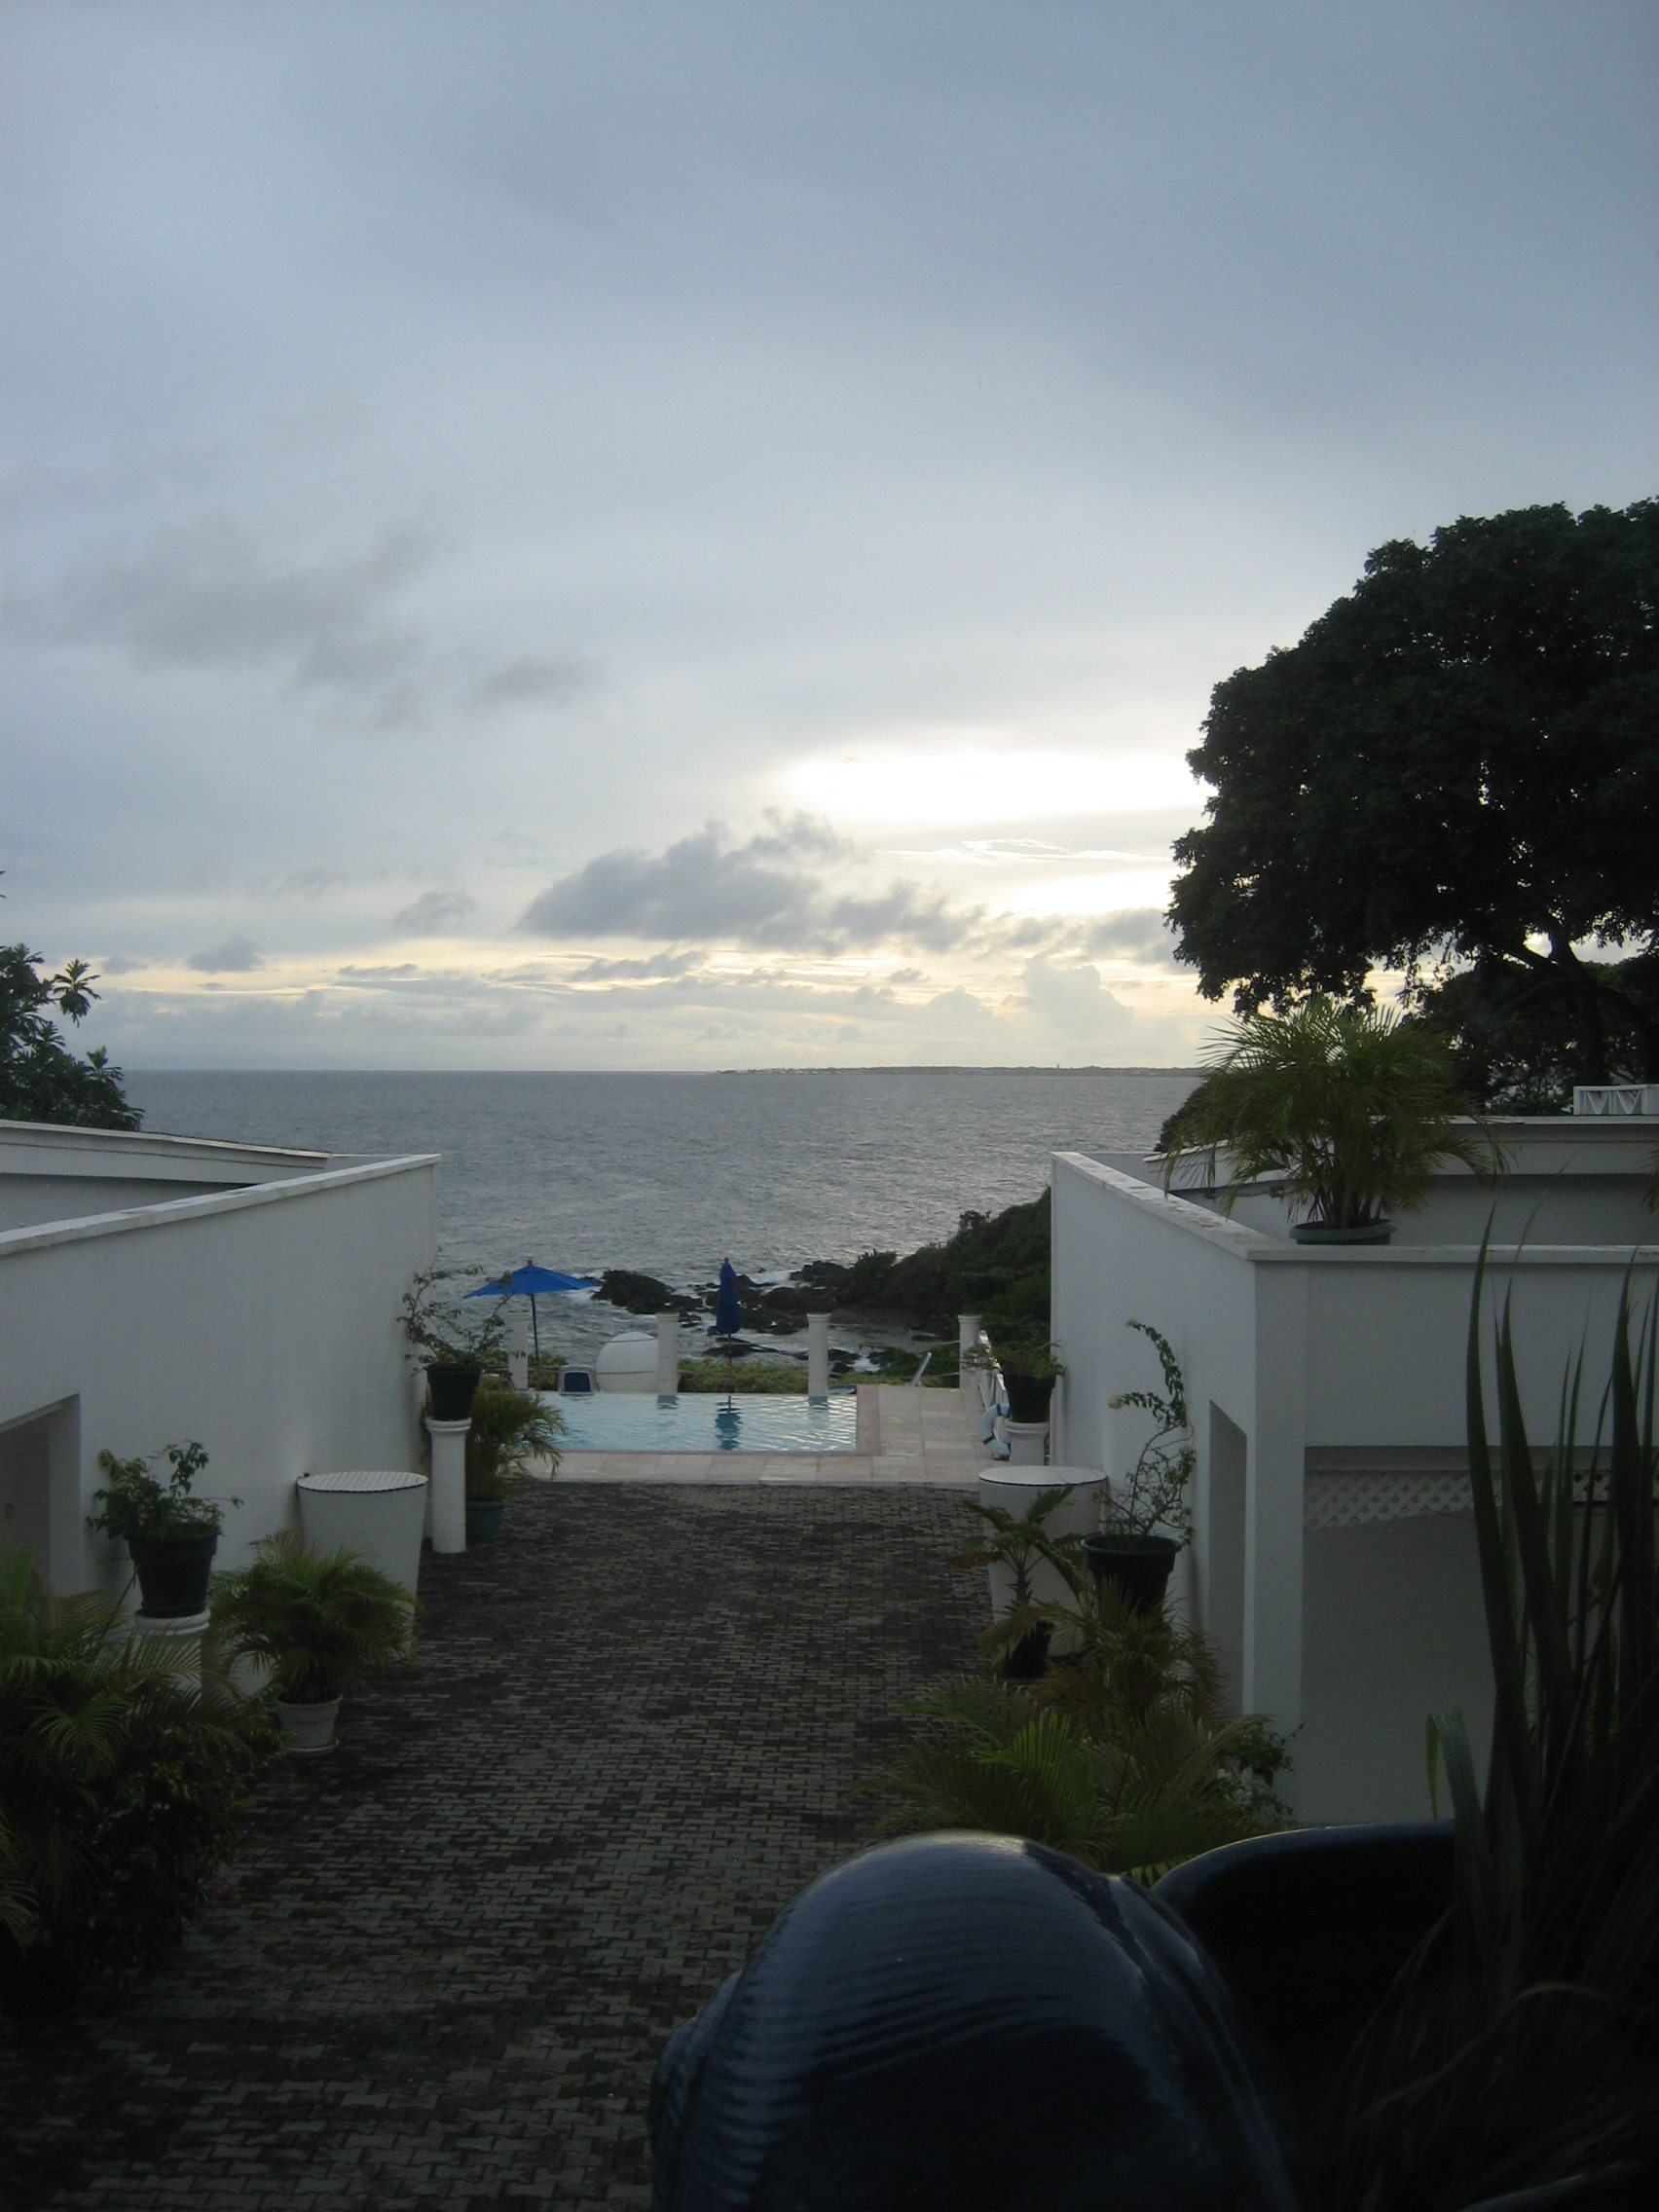 Sea and sunset view in Tobago near Scarborough